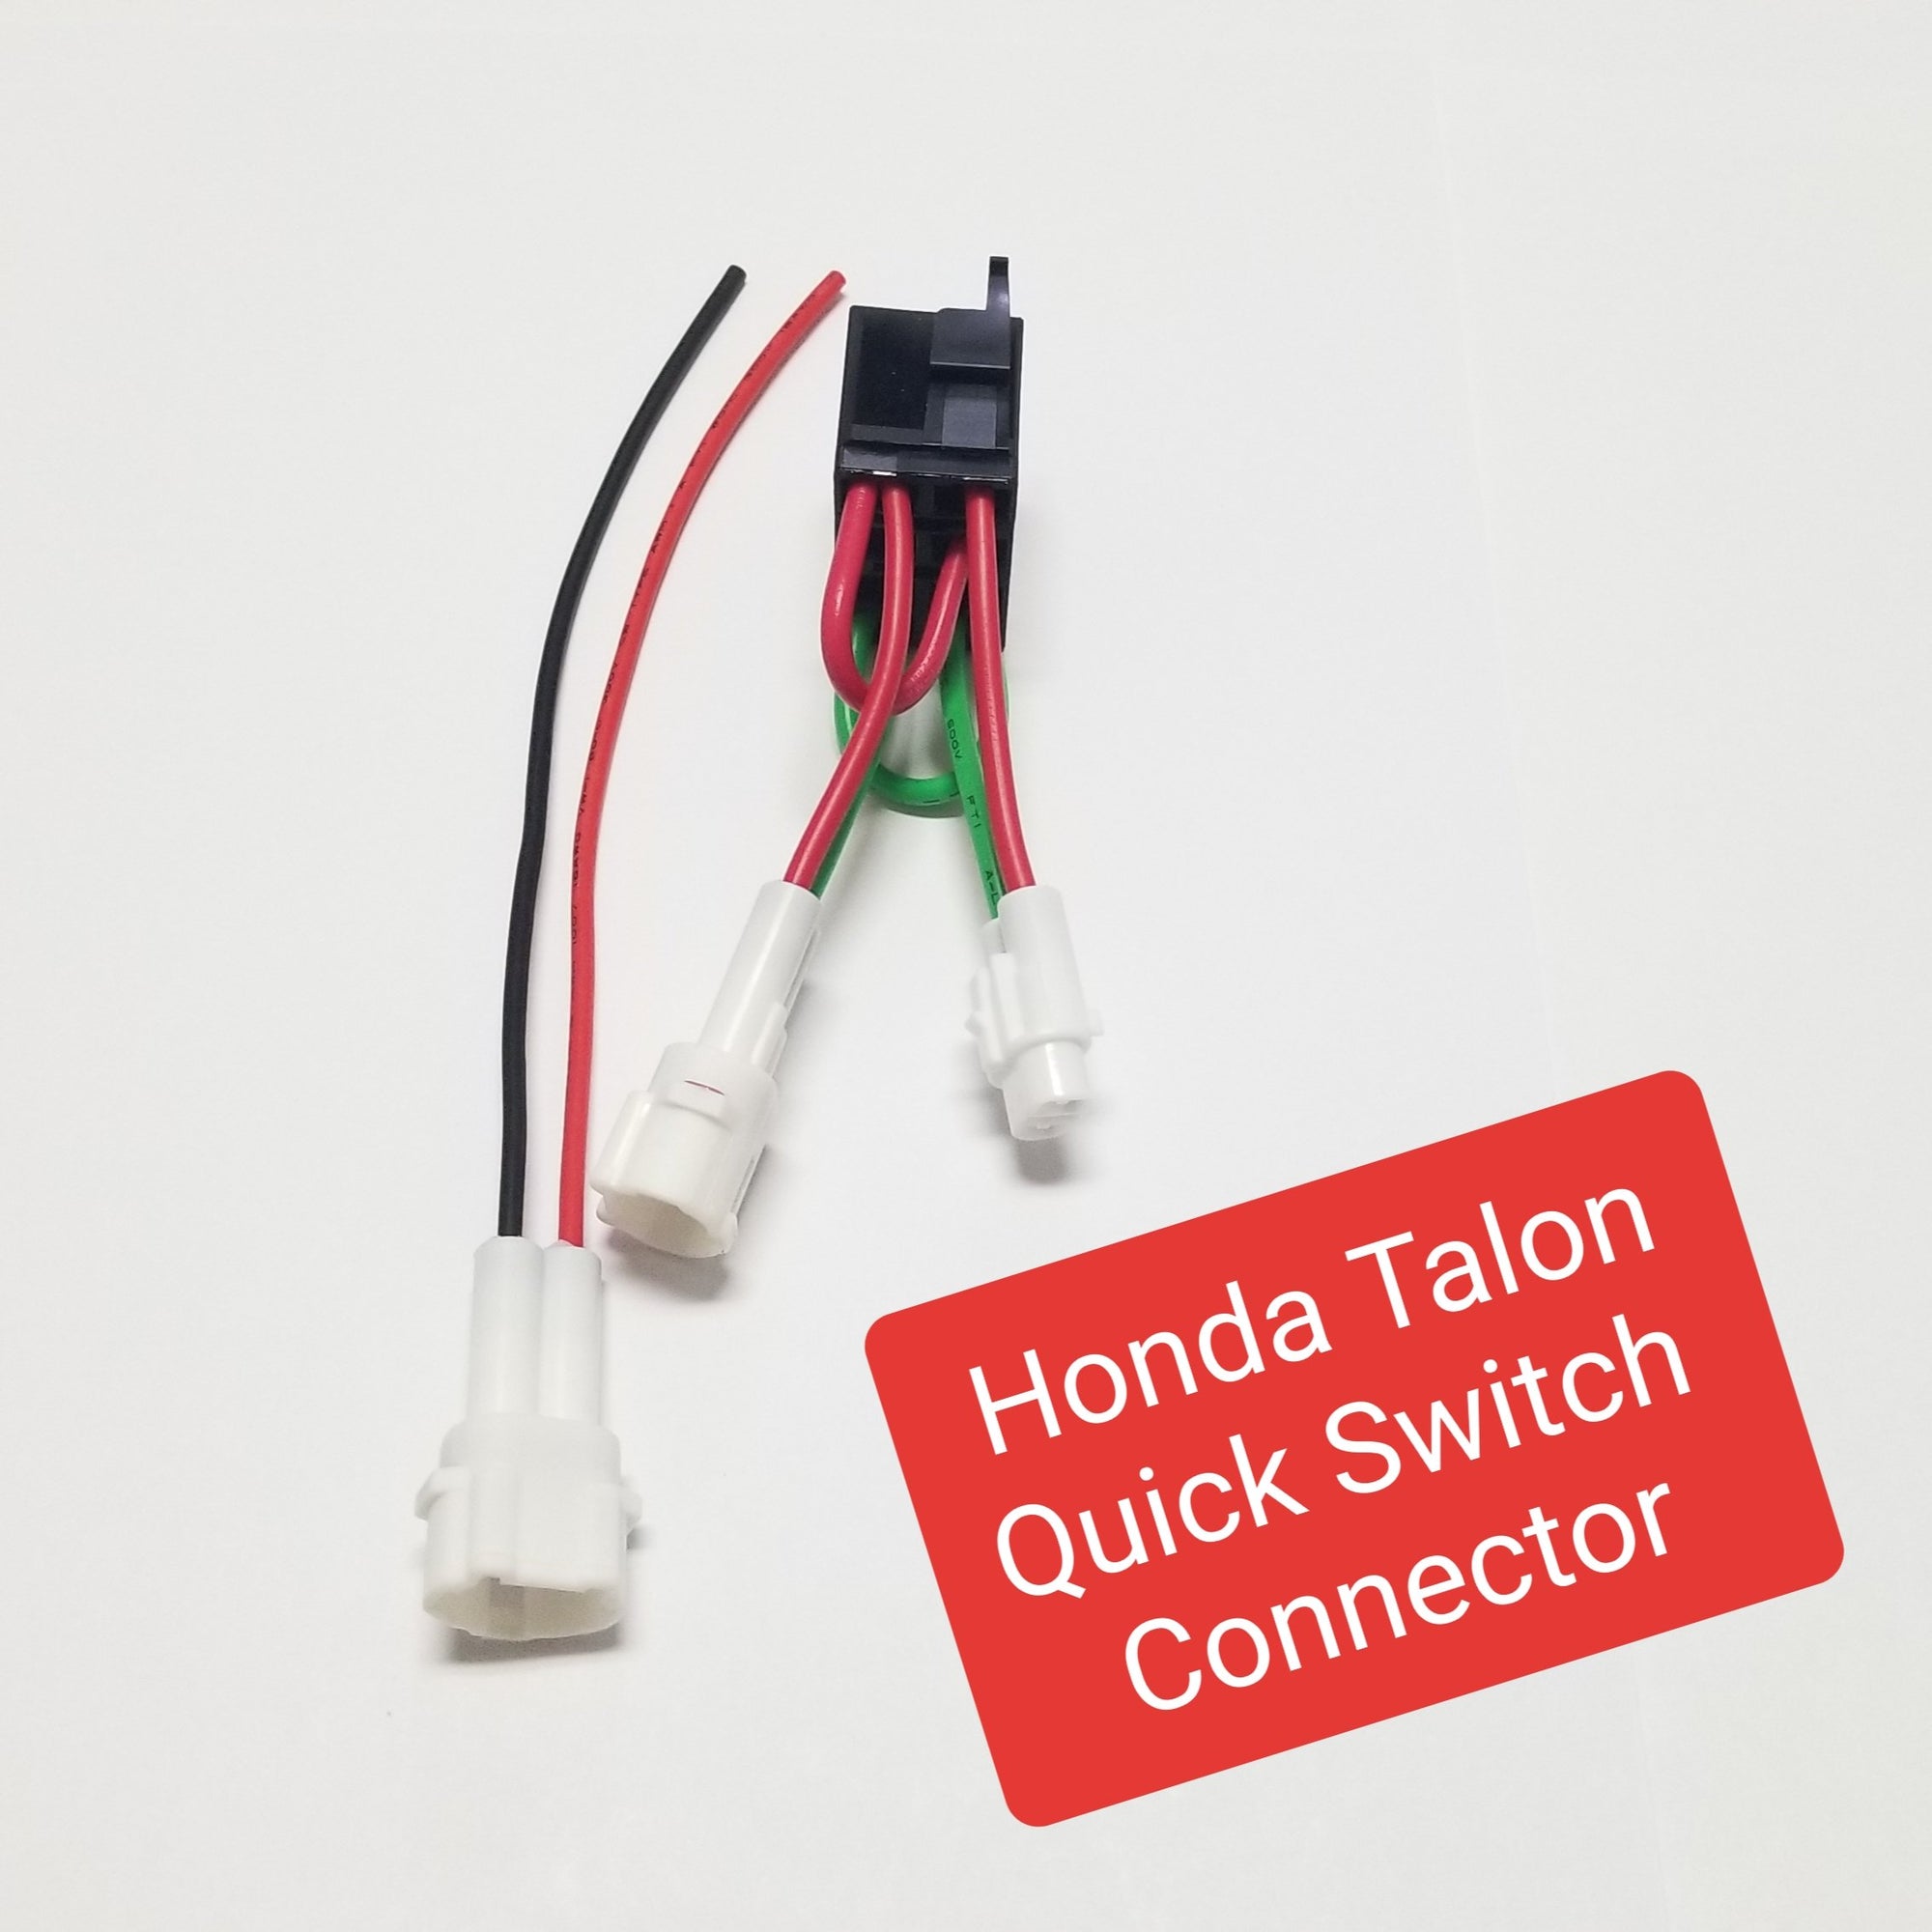 Honda Talon 1000 R/X Quick Switch Connector for OEM Switch Panel Kit.